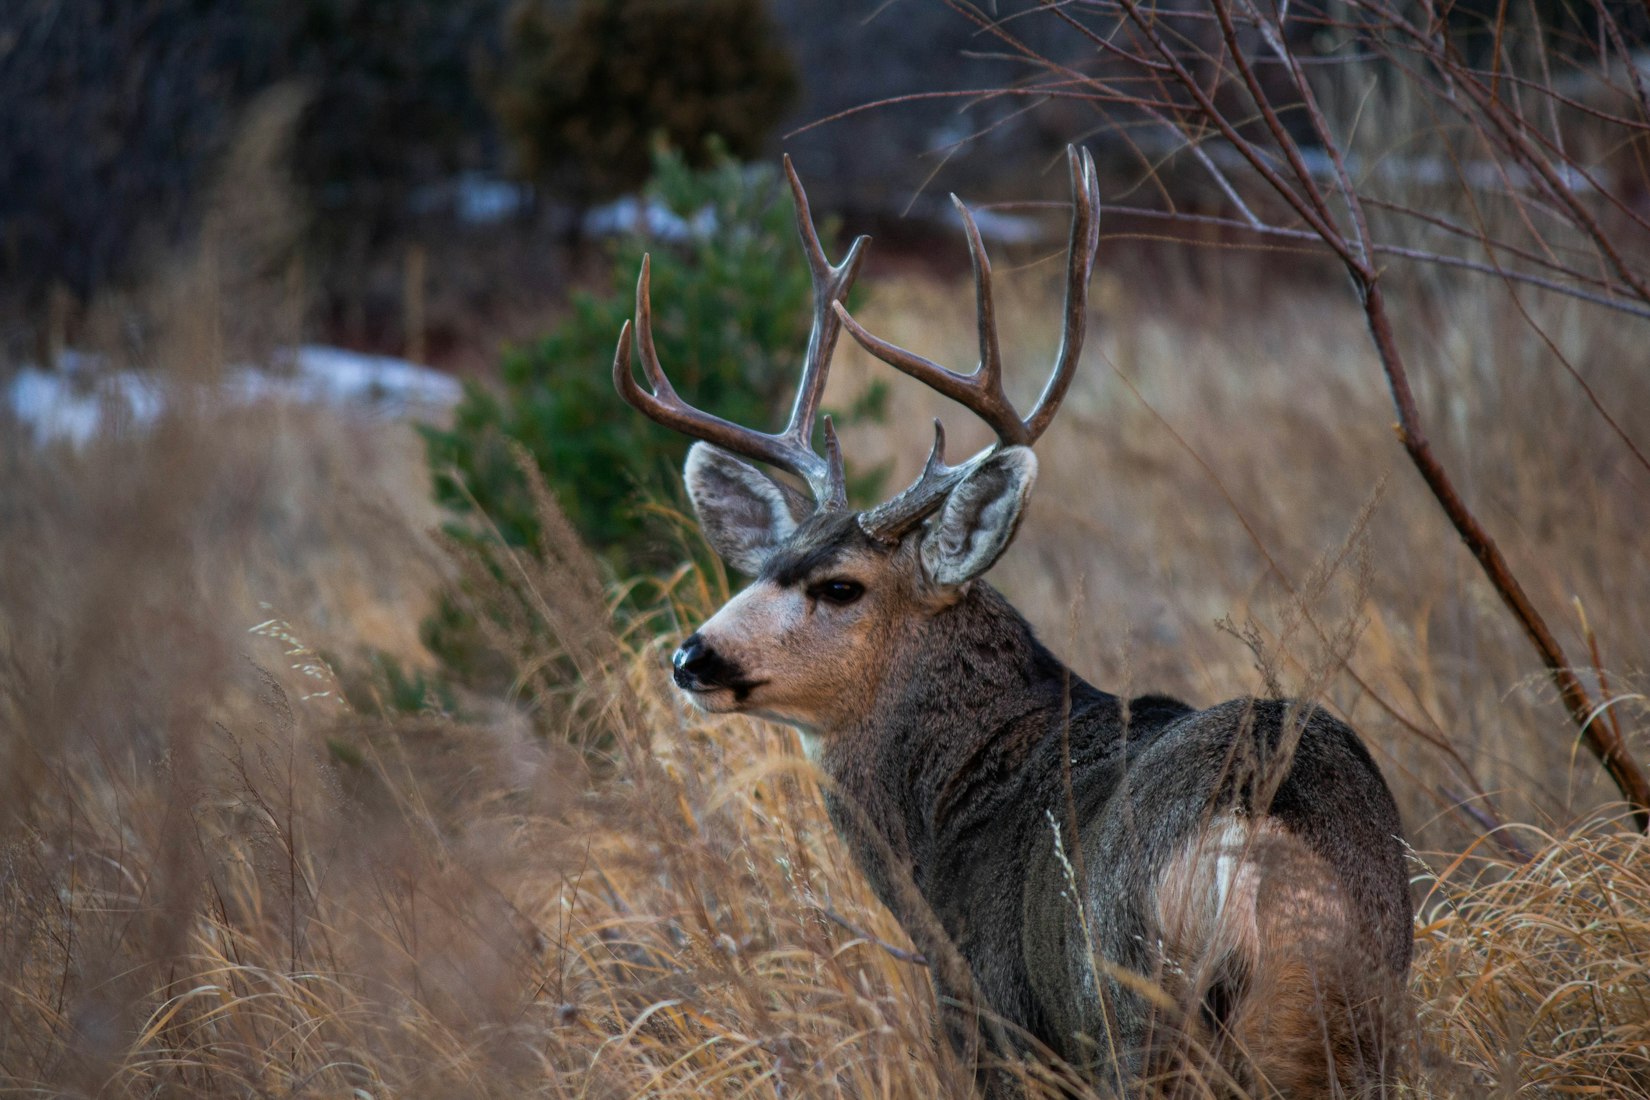 Culling of Bucks Doesn’t Lead To Bigger Bucks, Research Says